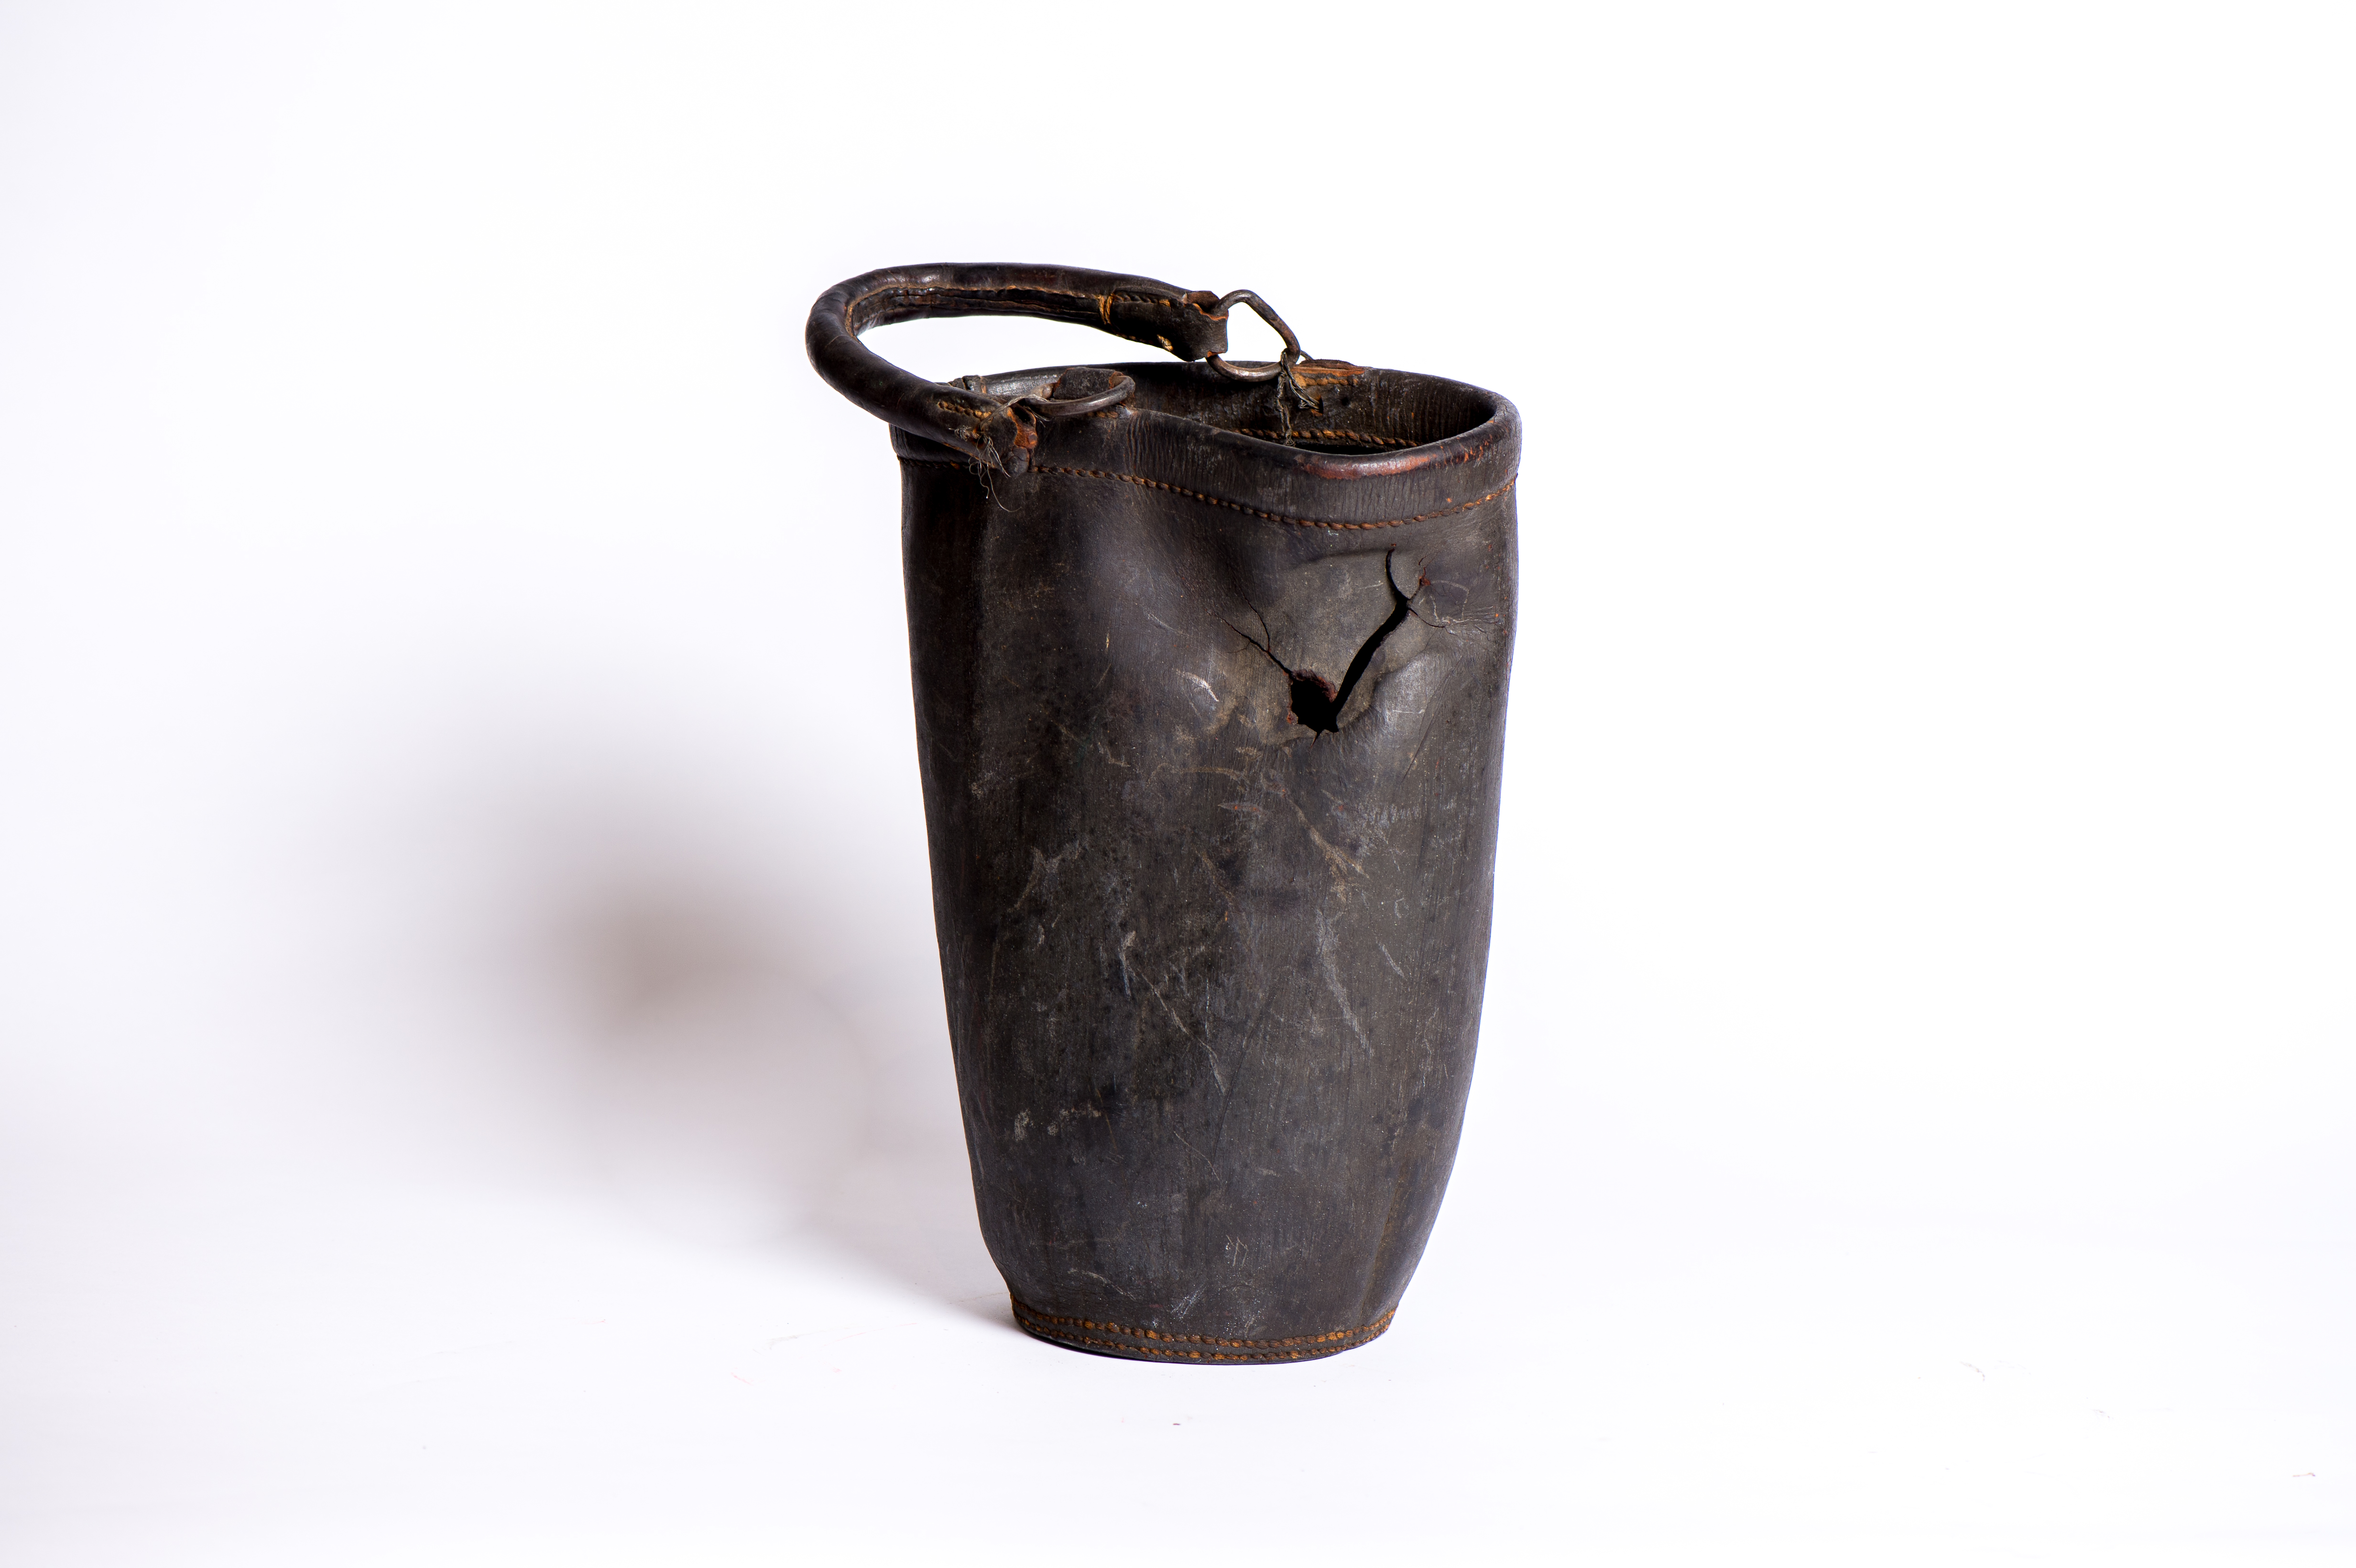 Photograph of an oval, black leather fire bucket on a white background. The bucket has a crack in it, clearly showing that it is old and worn.